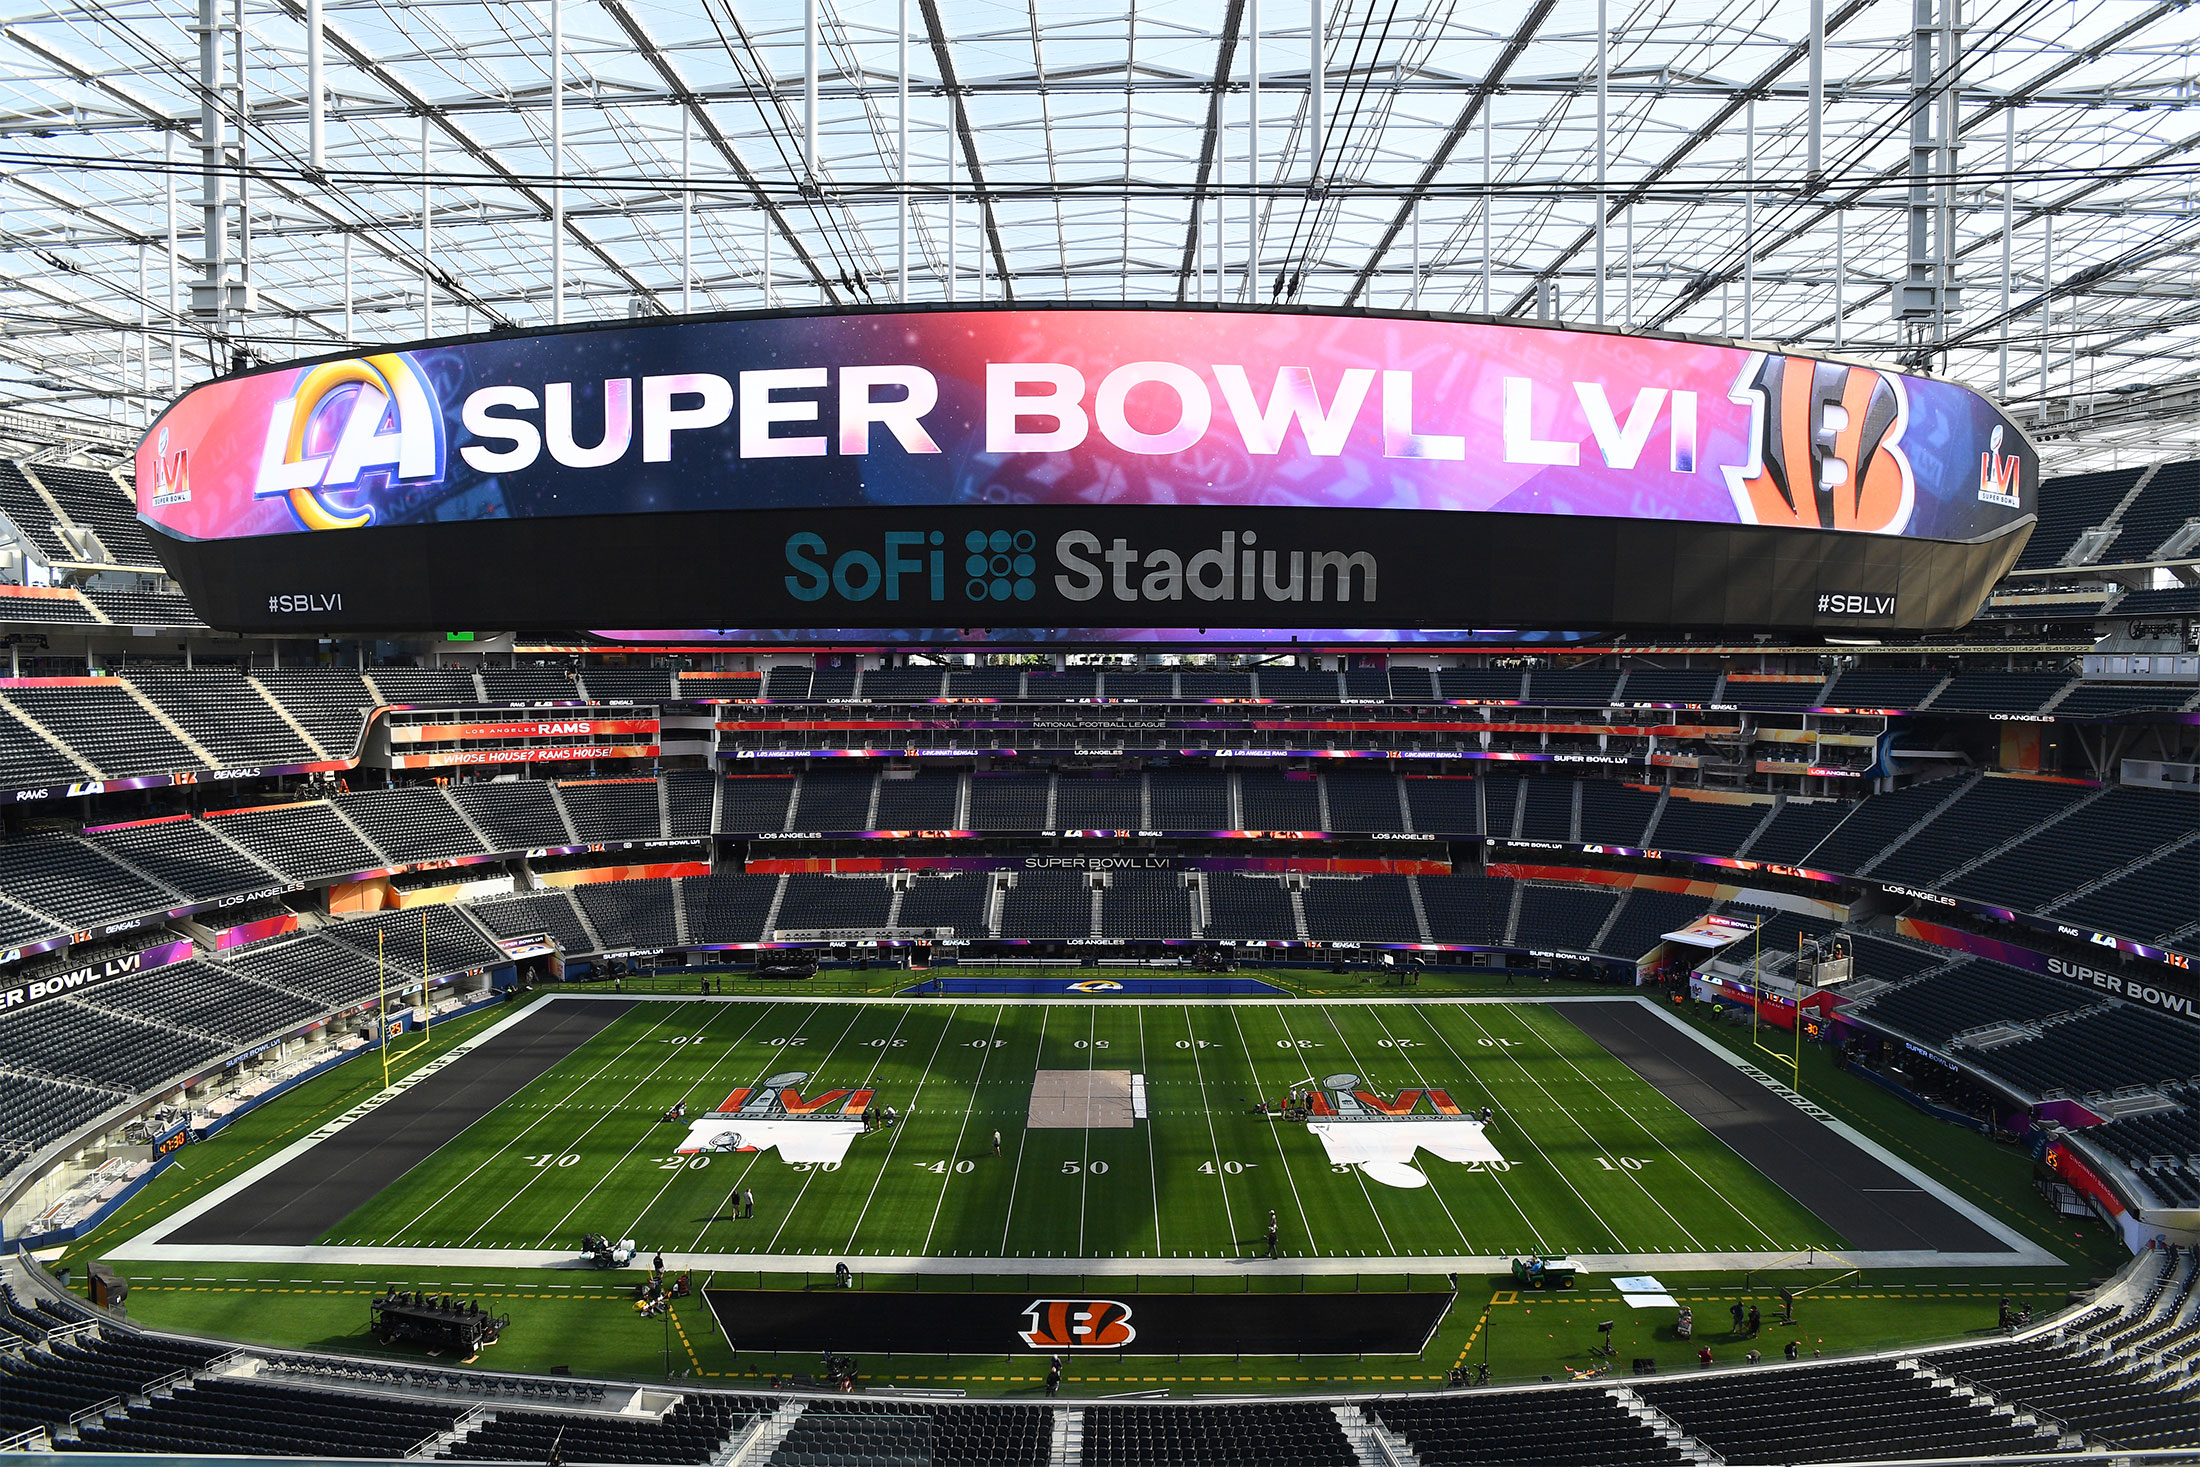 cost of 50 yard line super bowl tickets